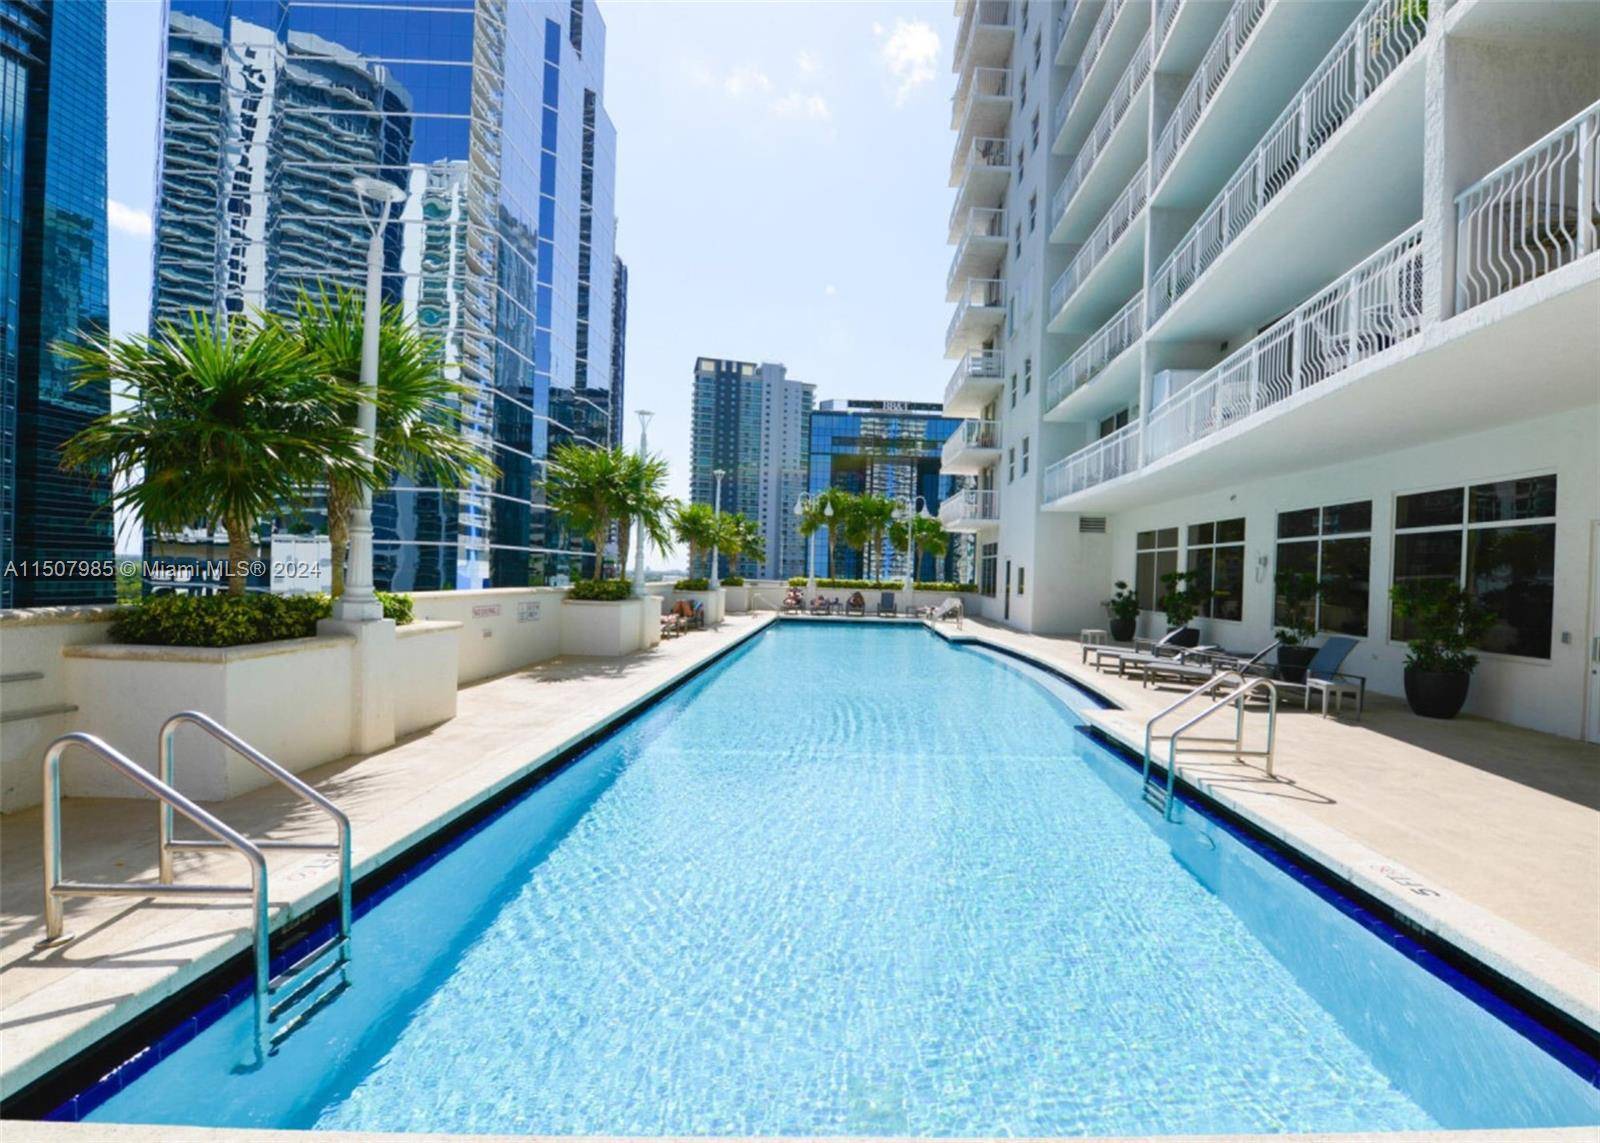 BEAUTIFUL 1BED 1BATH IN THE CLUB AT BRICKELL BAY PLAZA IN BRICKELL.